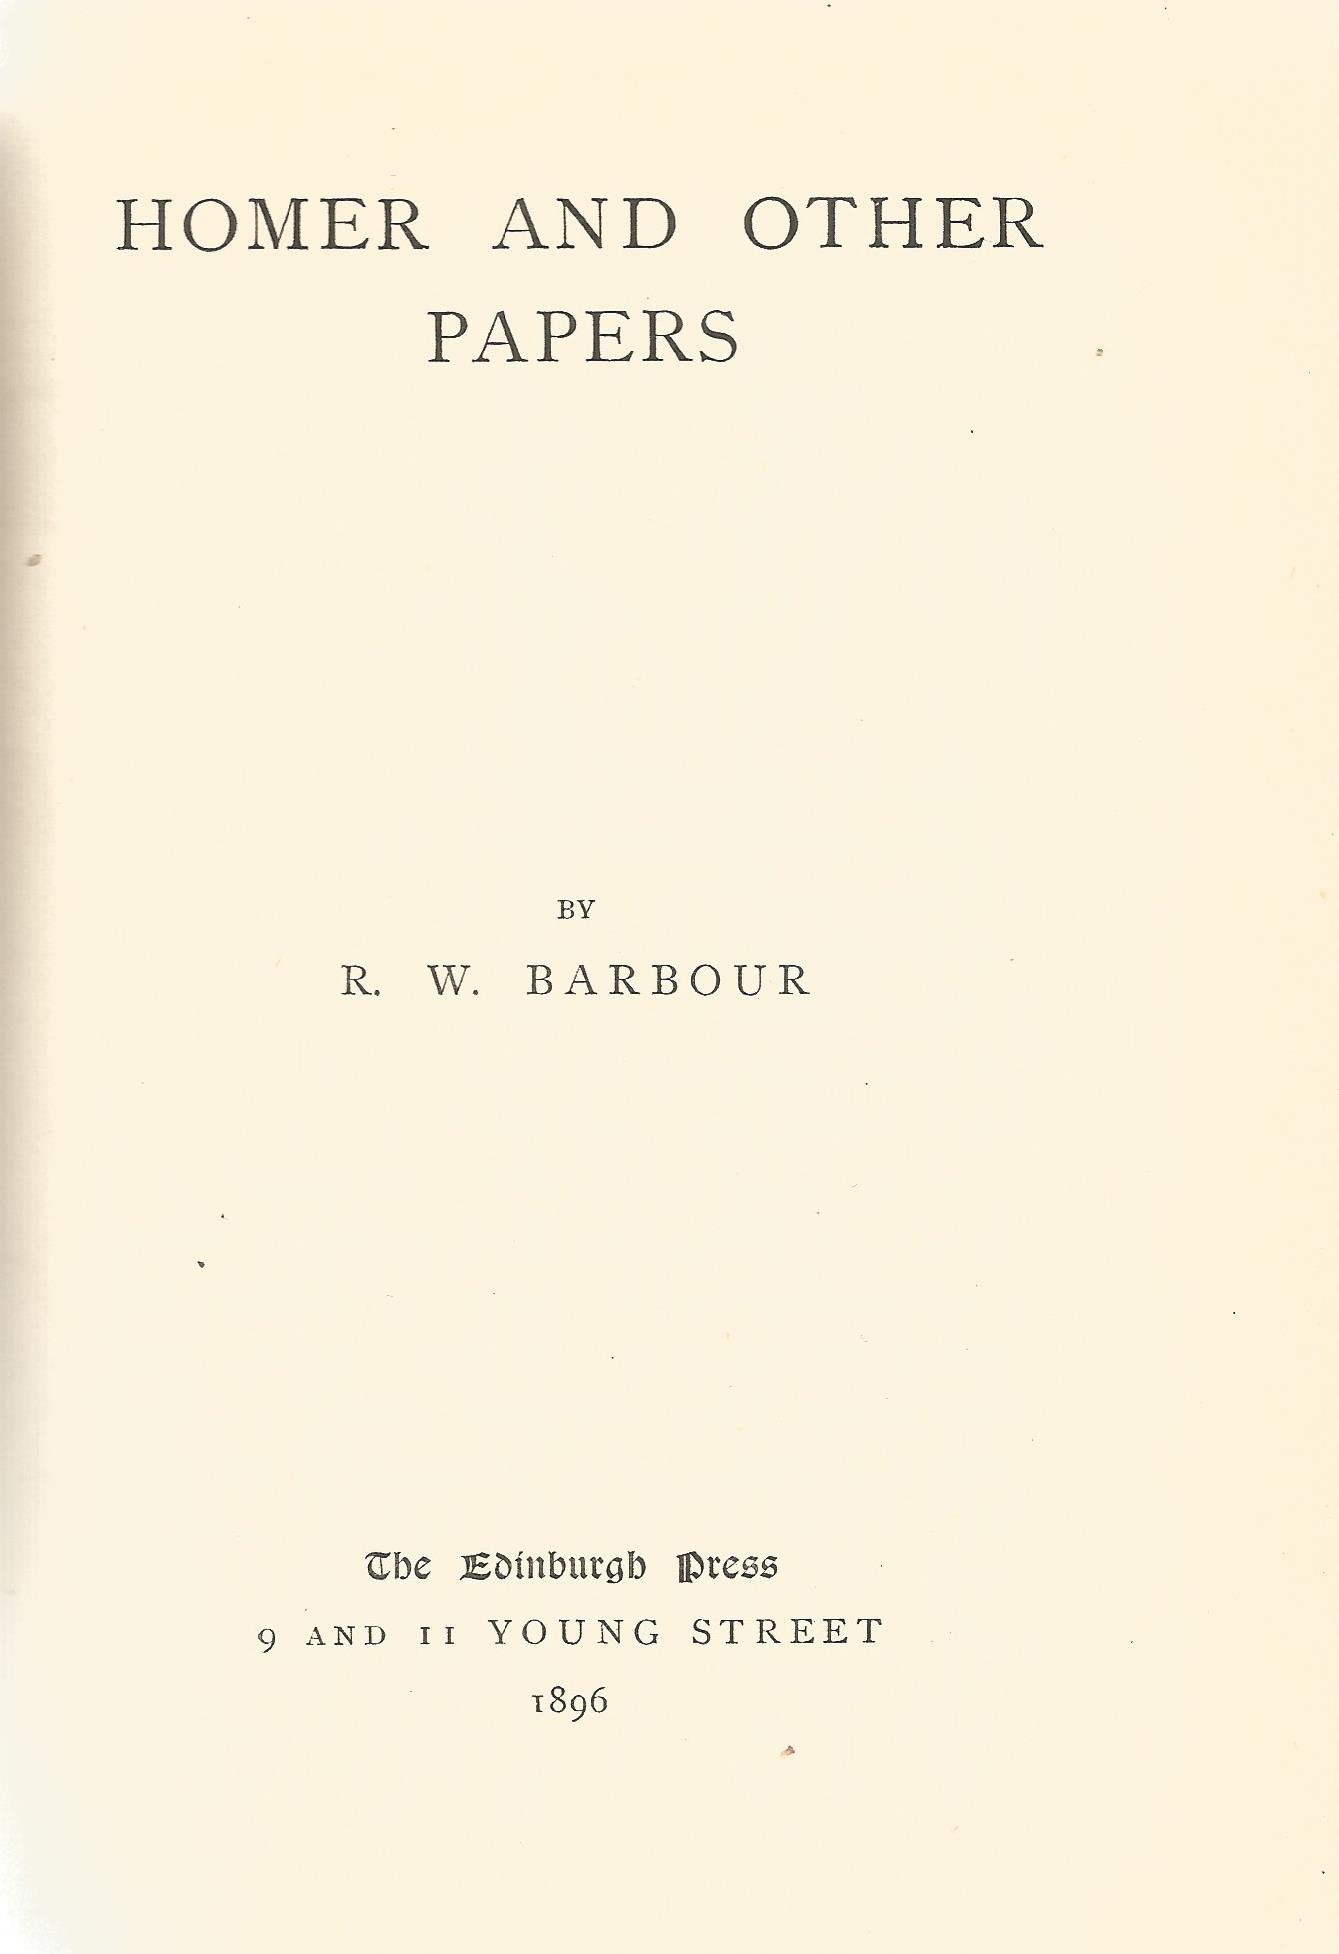 Homer and other Papers by R W Barbour 1896 Hardback Book published by The Edinburgh Press some - Image 2 of 2